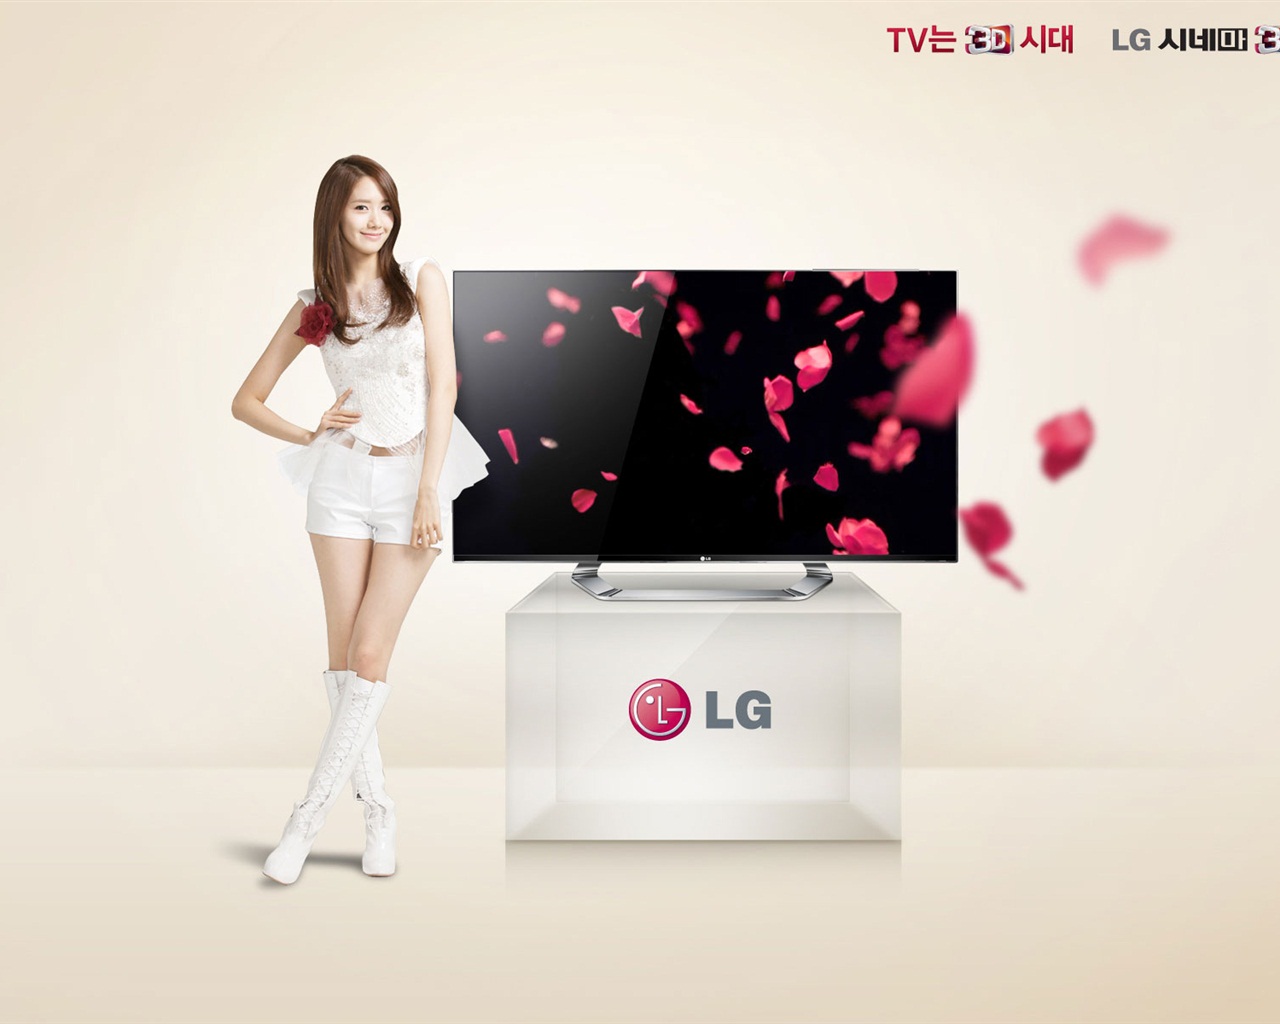 Girls Generation ACE and LG endorsements ads HD wallpapers #20 - 1280x1024